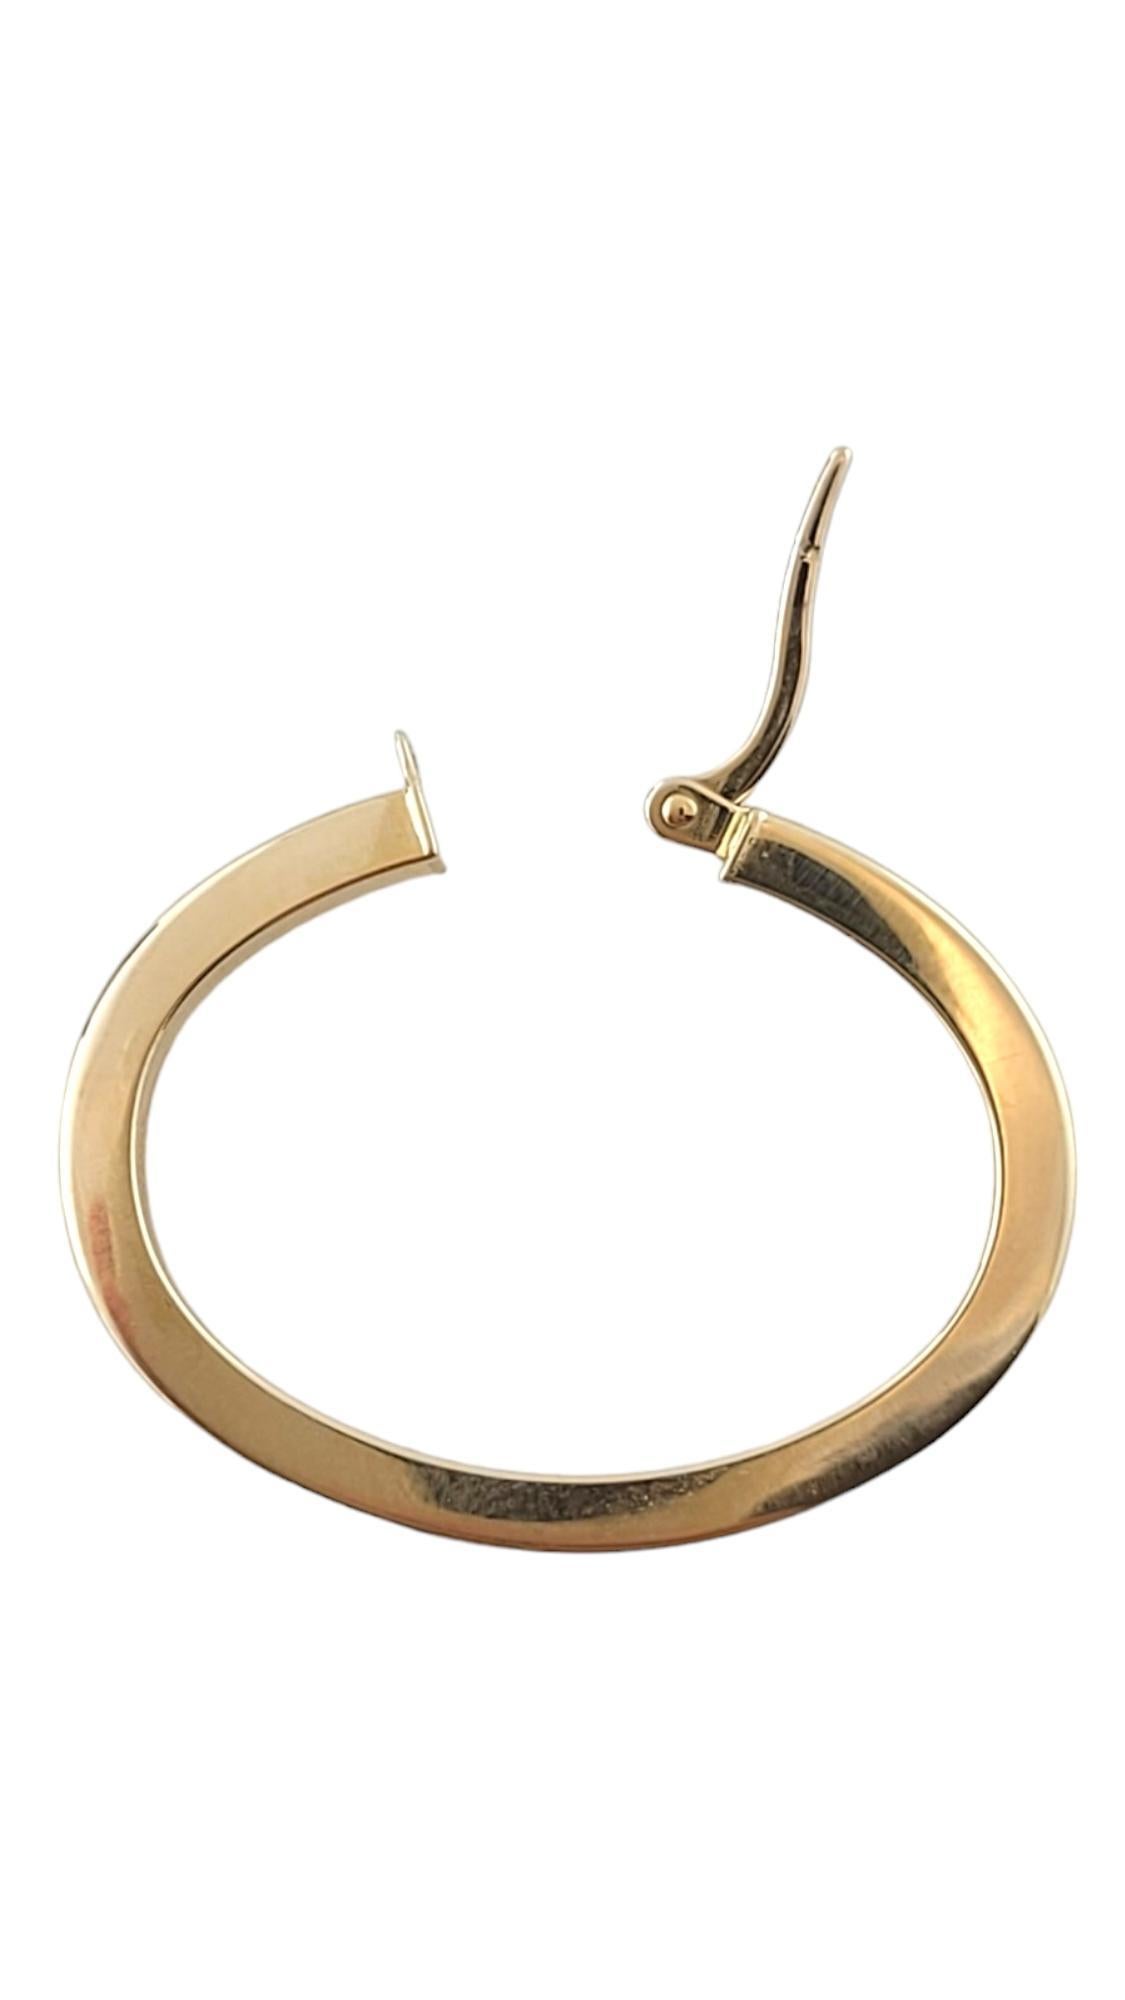 14K Yellow Gold Oval Hoop Earrings #17381 In Good Condition For Sale In Washington Depot, CT